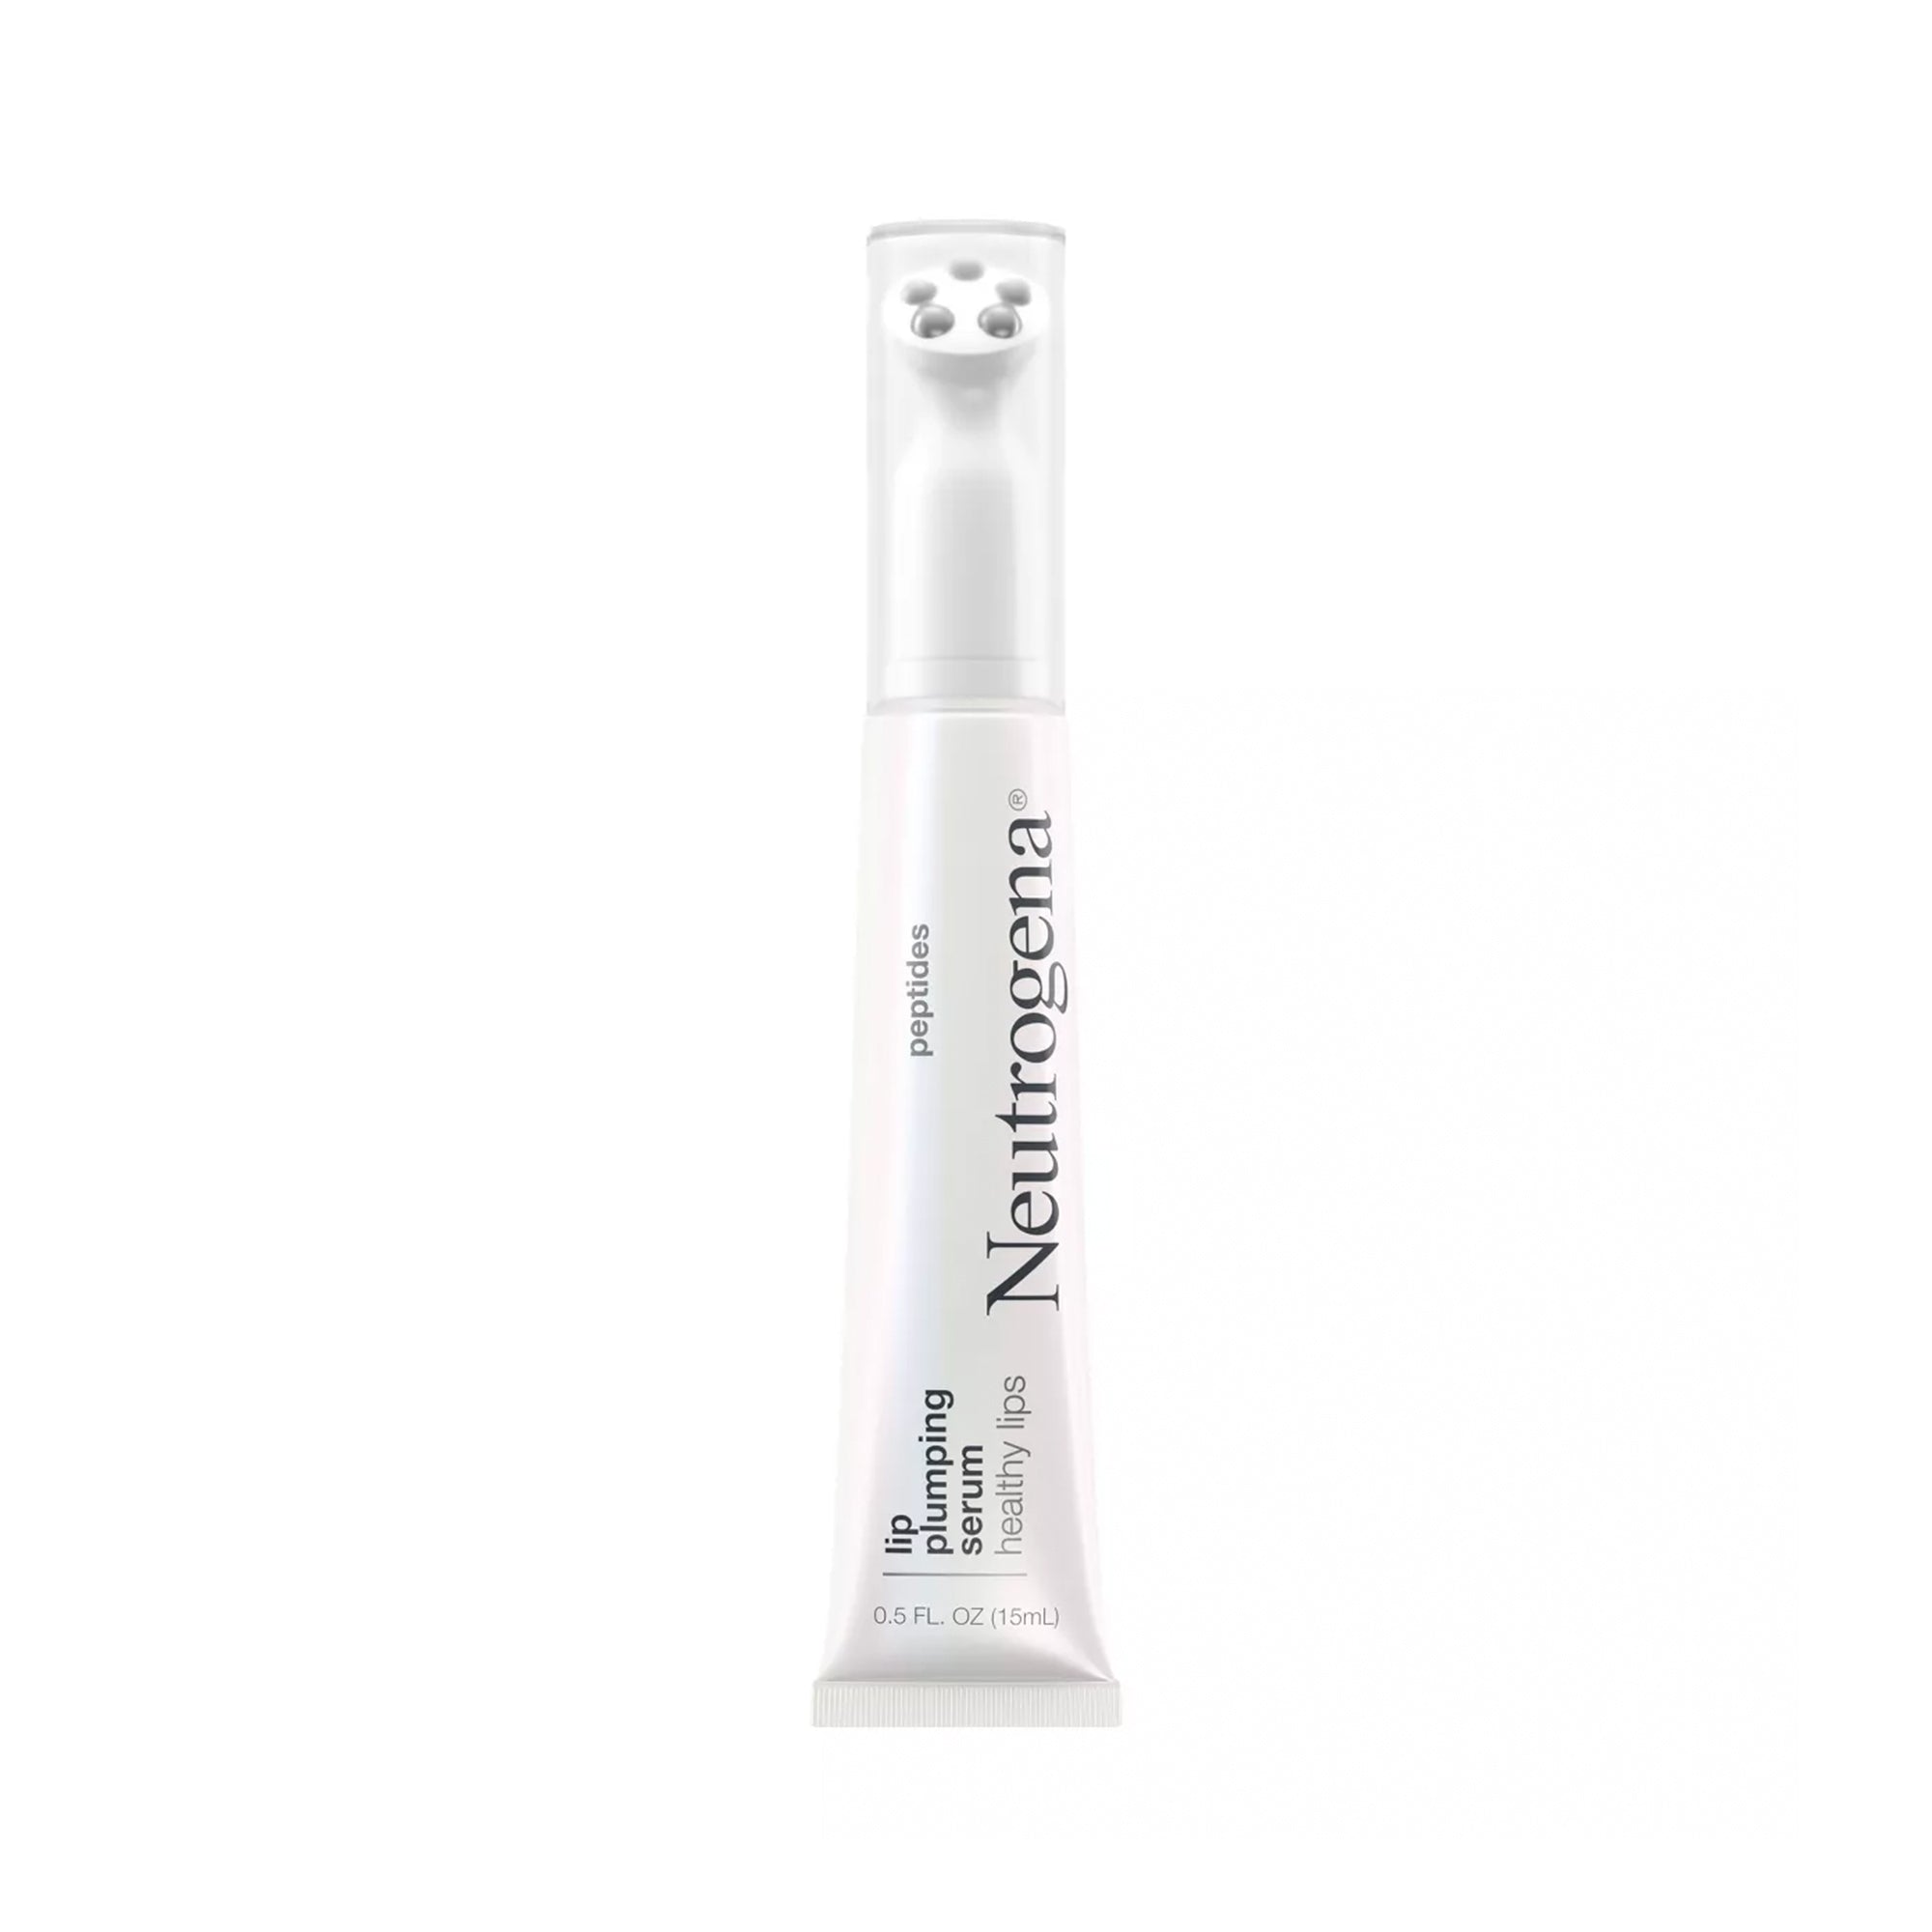 Neutrogena Healthy Lips Plumping Serum with Peptides to Promotes the Appearance of Naturally Fuller and Plumper Looking Lips, 0.5 fl oz